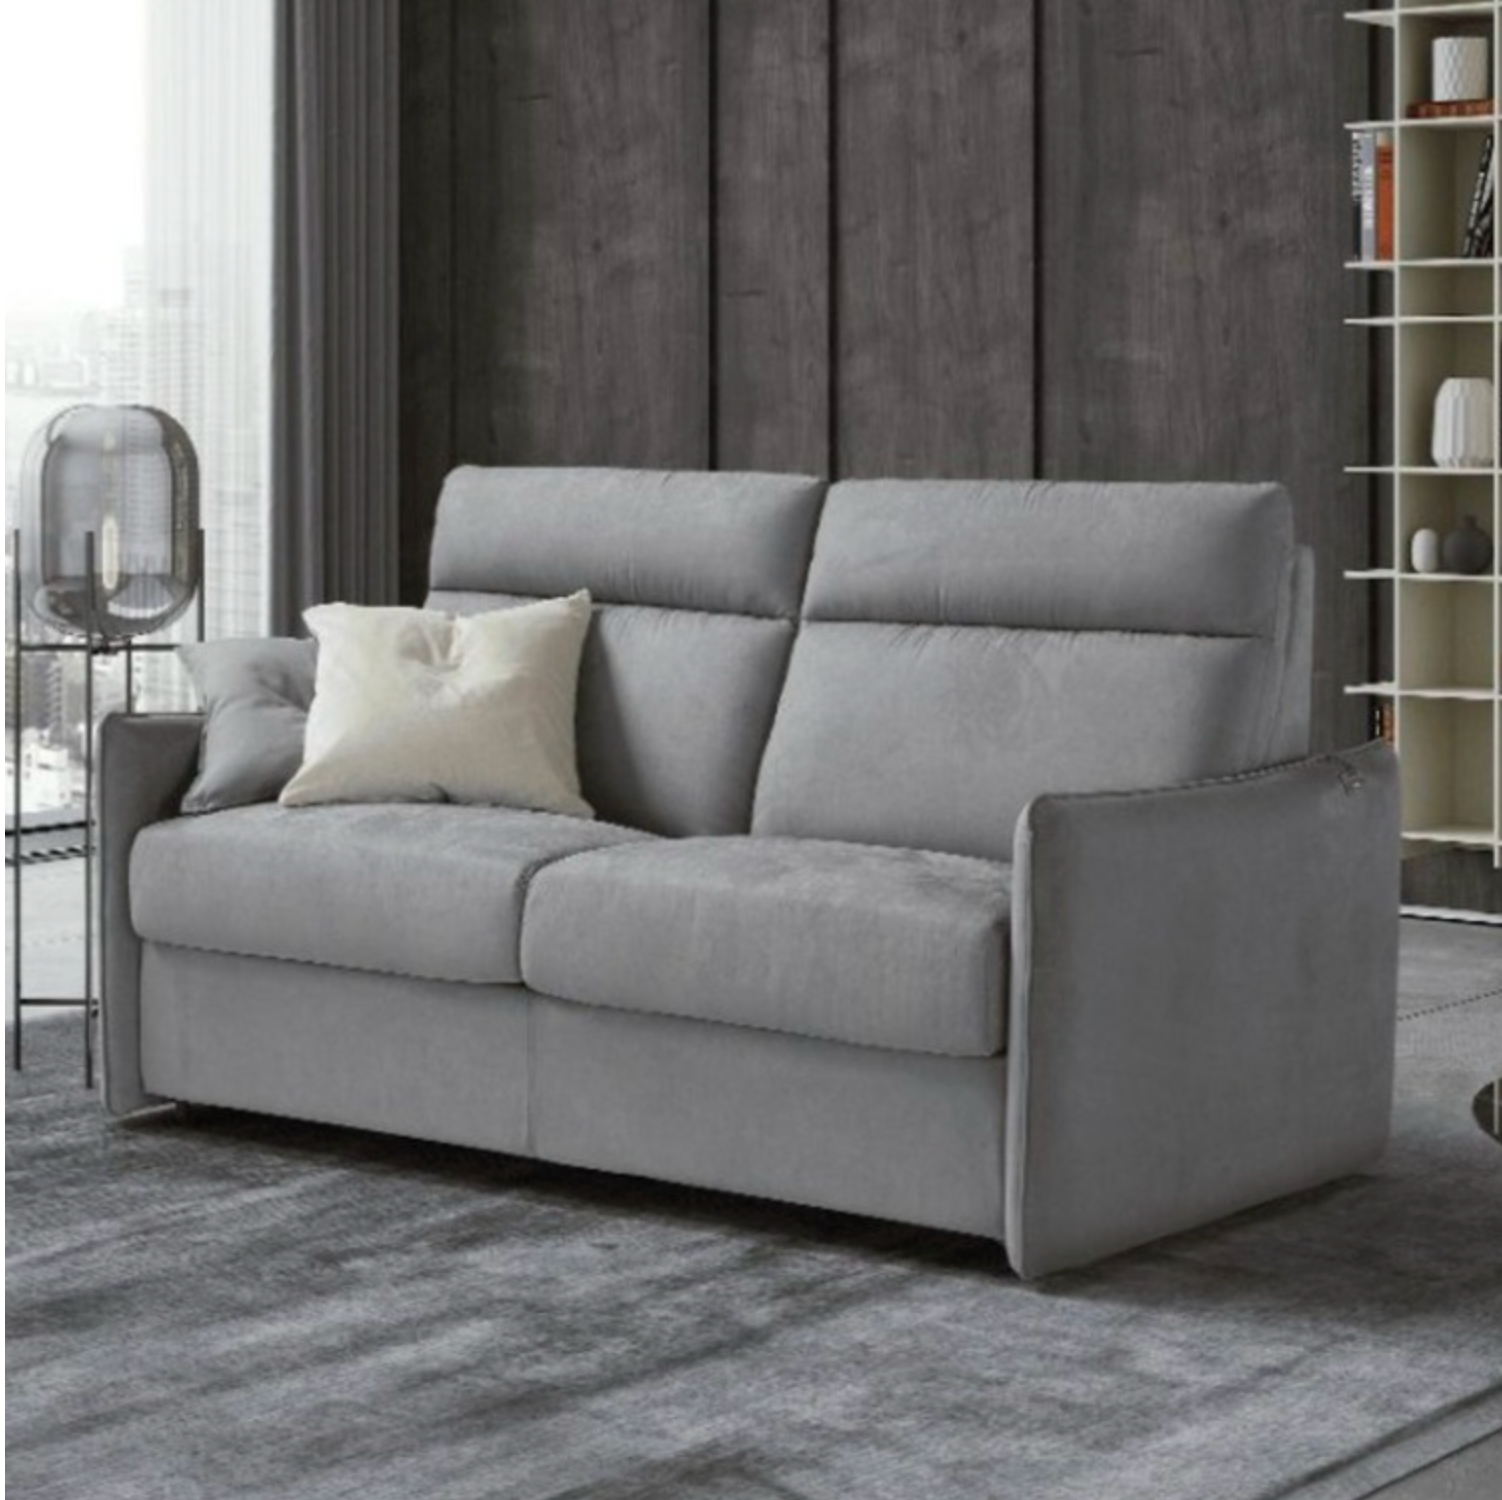 Aimee 3 Seater Sofa Bed New trend concepts Italy